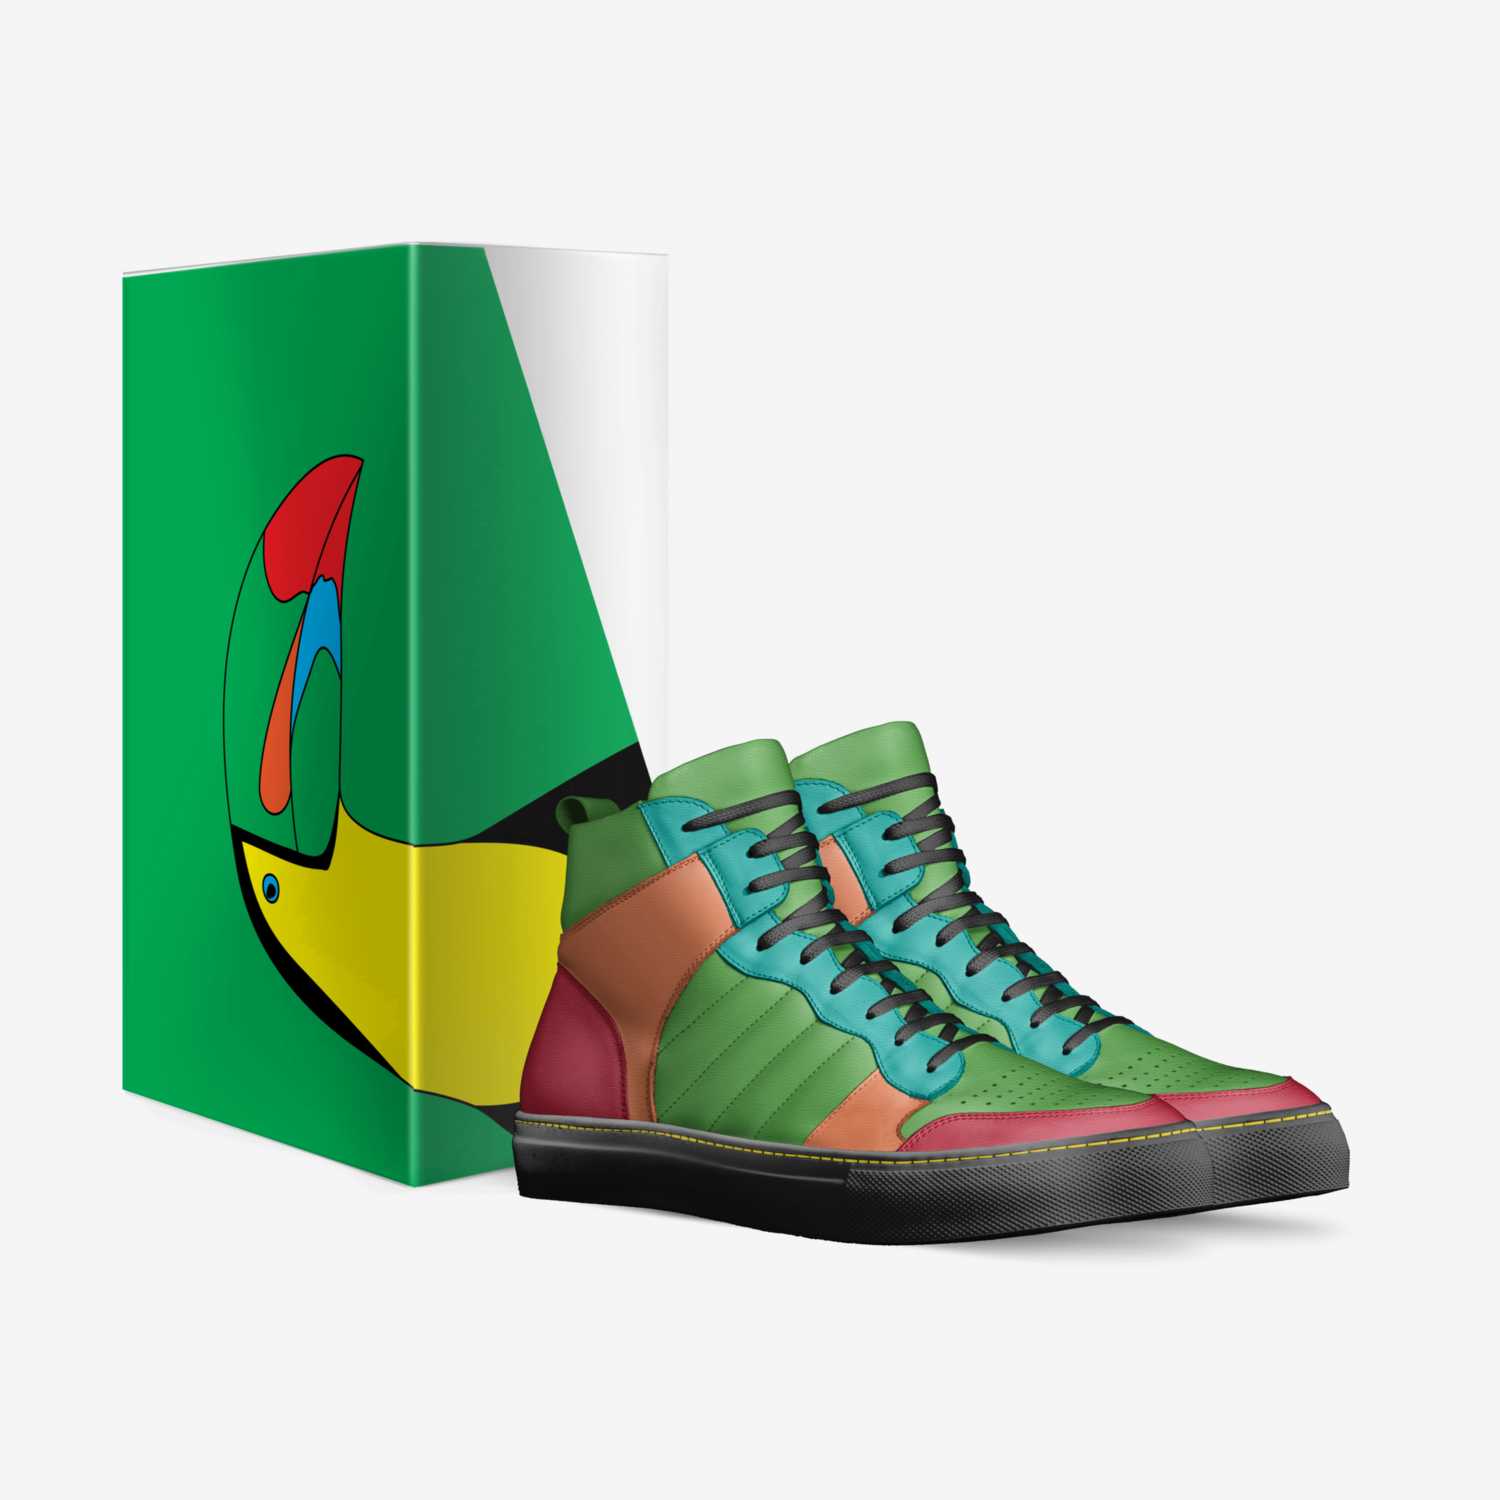 Keel-billed custom made in Italy shoes by Ranique Leslie | Box view